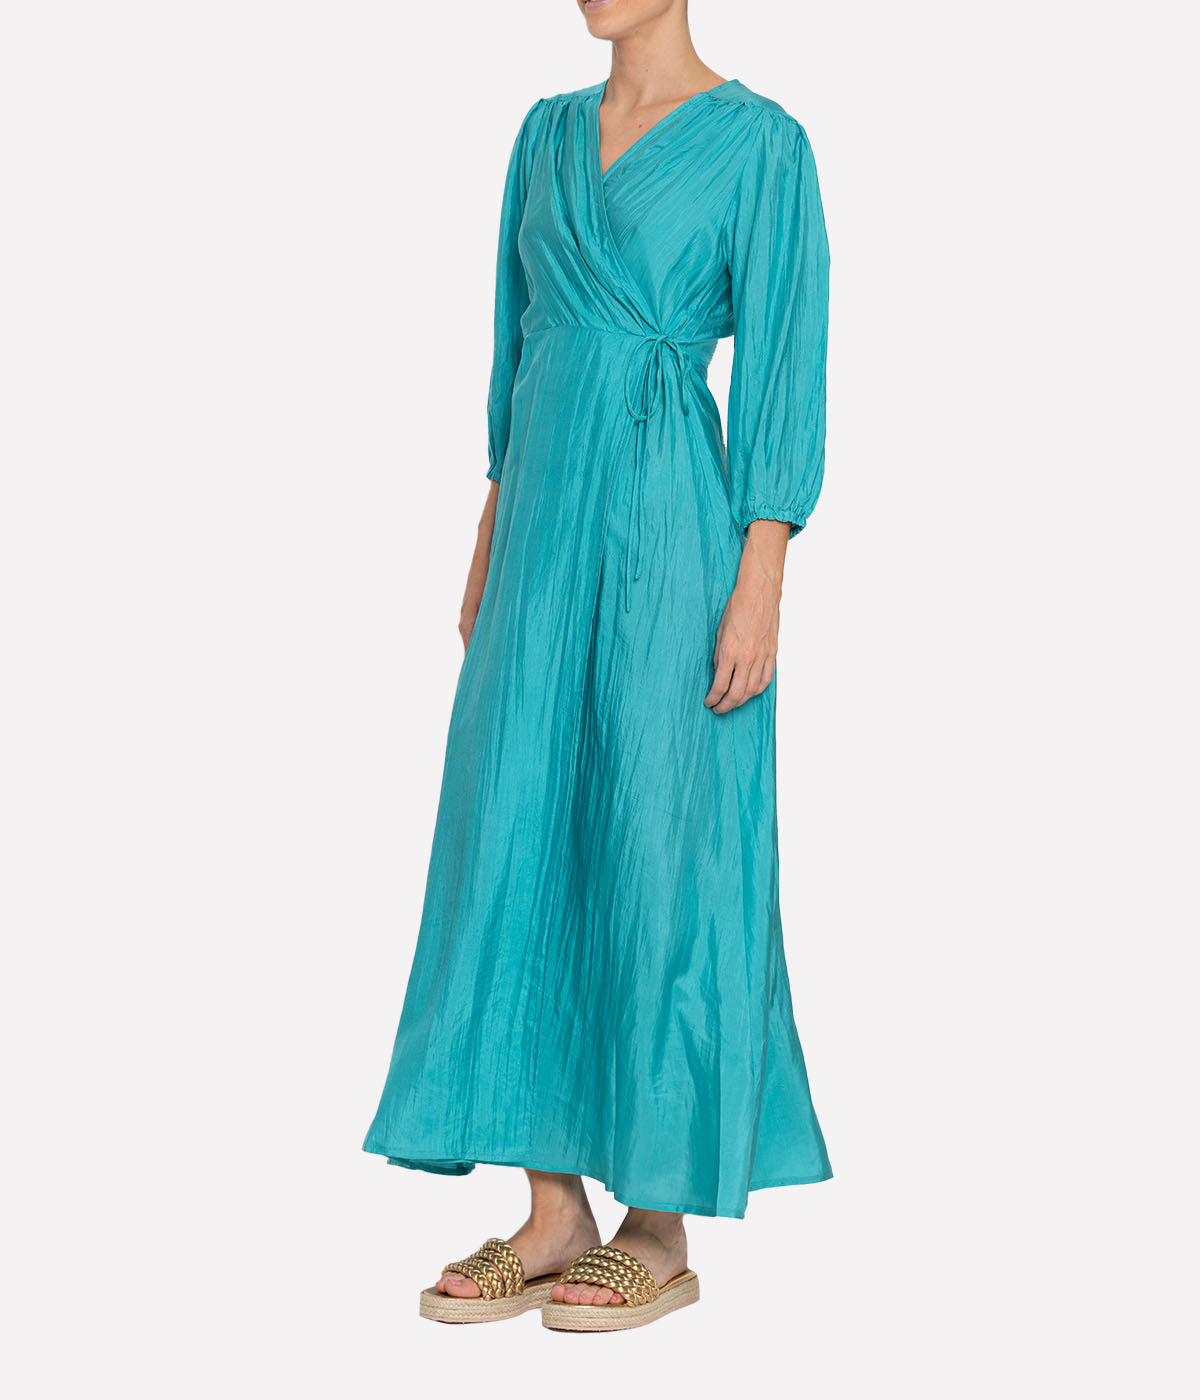 Wrap Around Dress in Turquoise